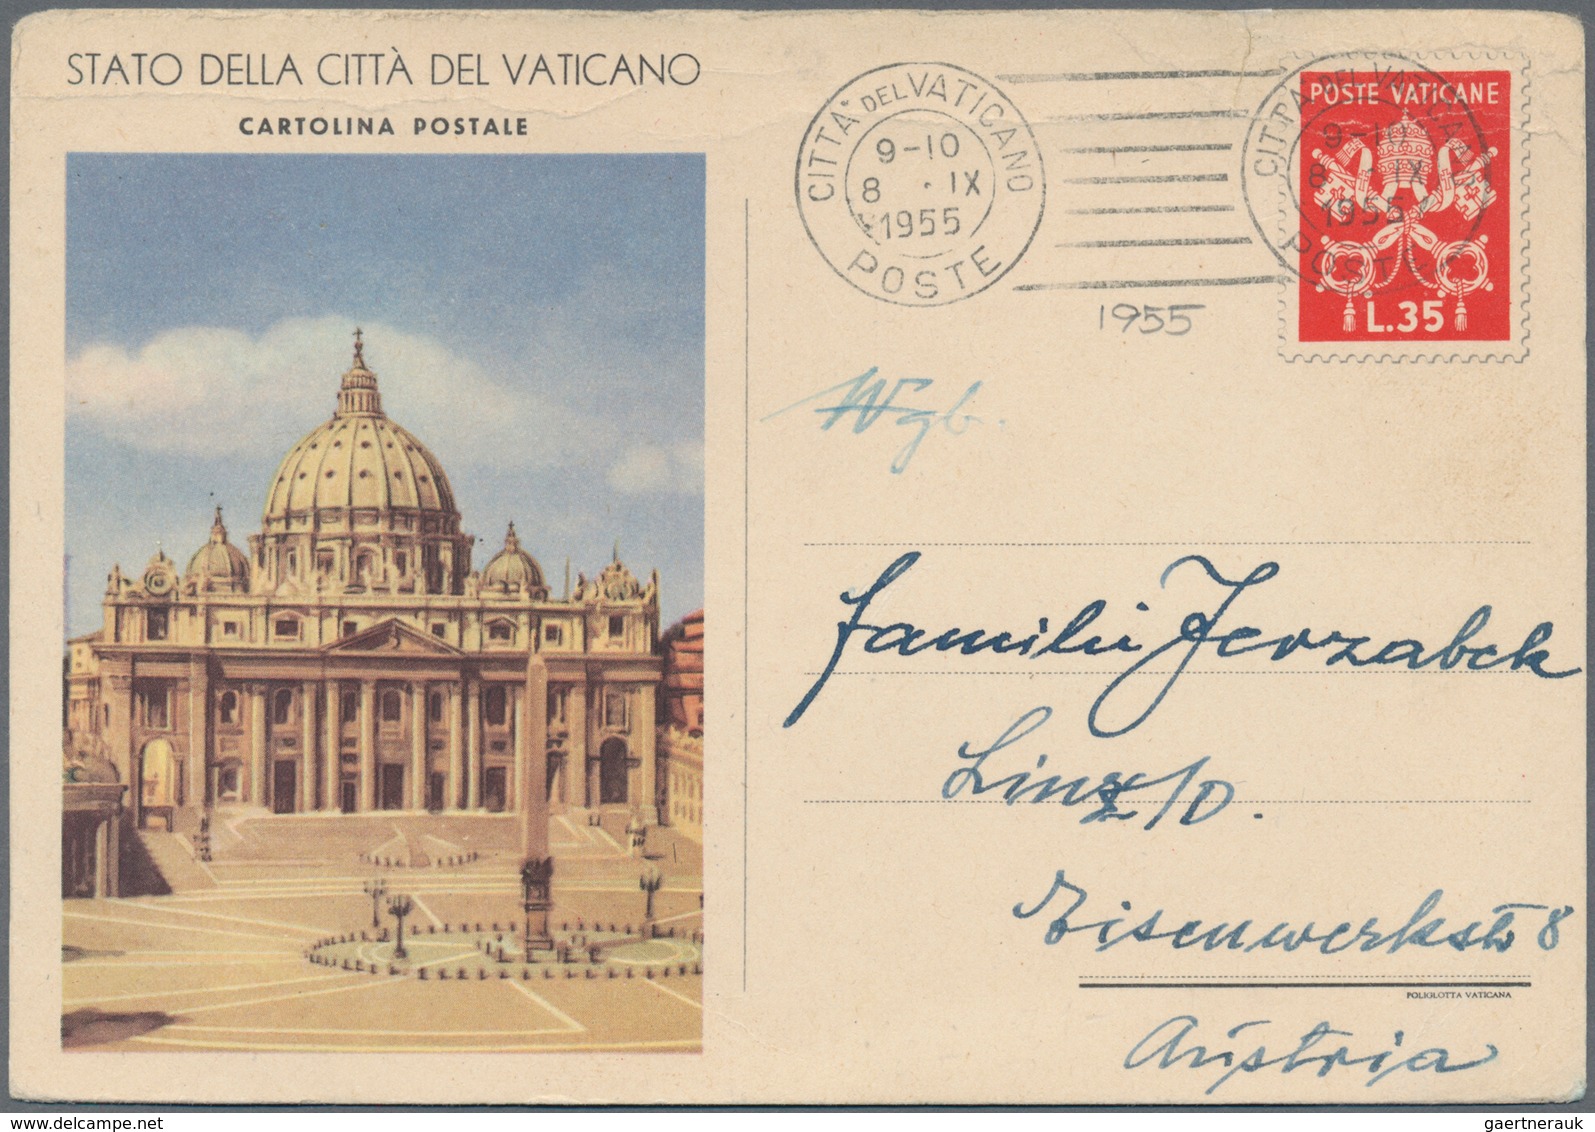 Alle Welt: 1890/1960 (ca.), holding of several hundred commercial covers/cards Europe and overseas,